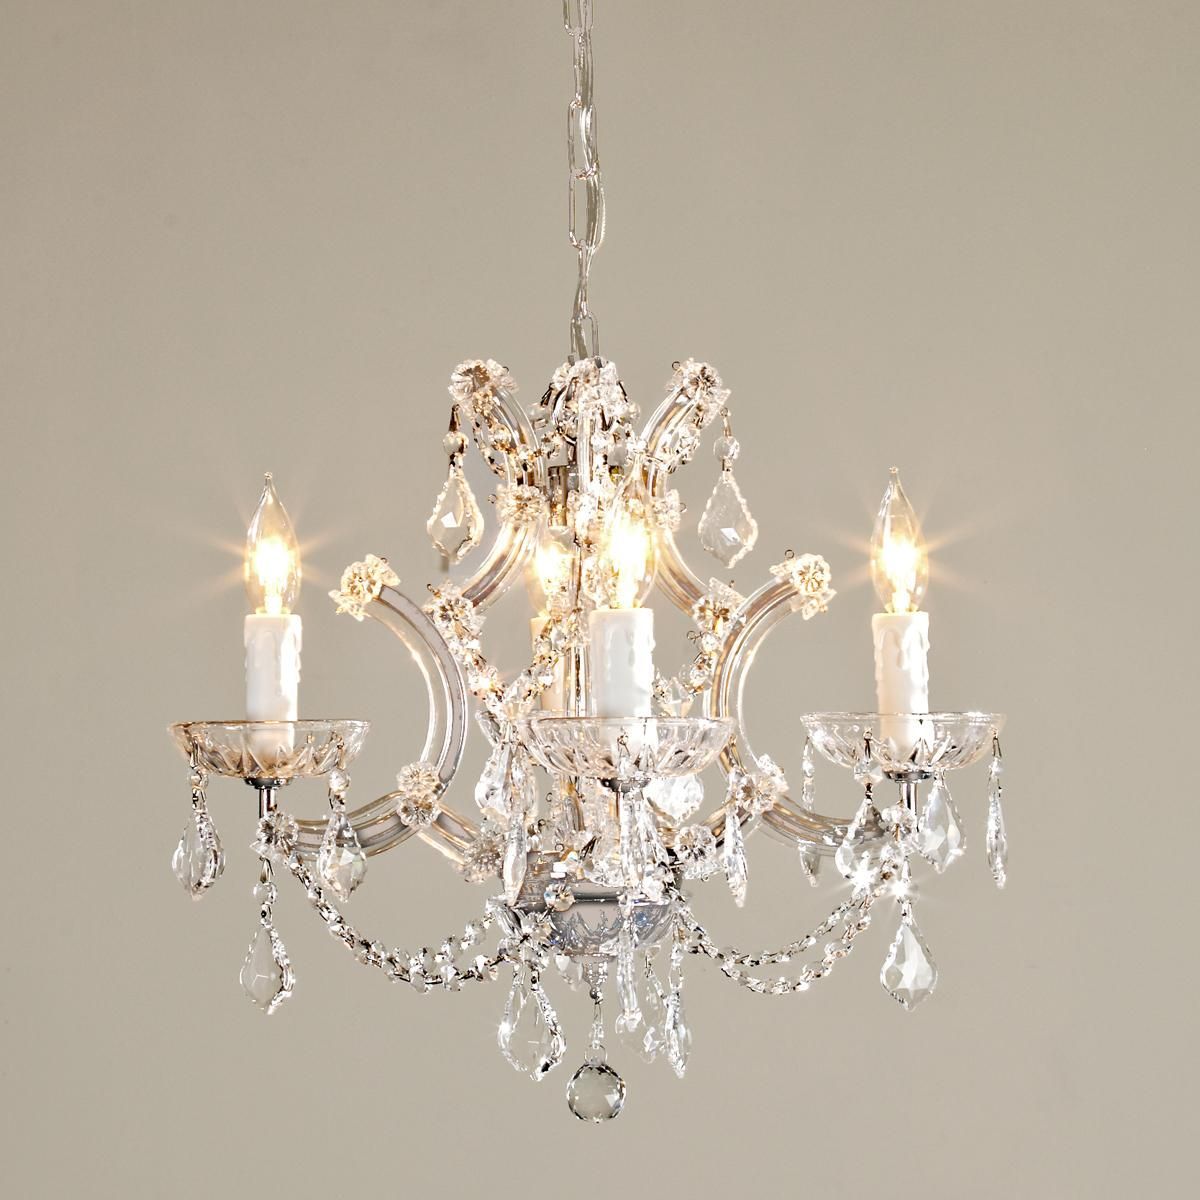 Round Crystal Chandelier | L&d Gerber | Chandelier Bedroom Intended For Blanchette 5 Light Candle Style Chandeliers (View 18 of 30)